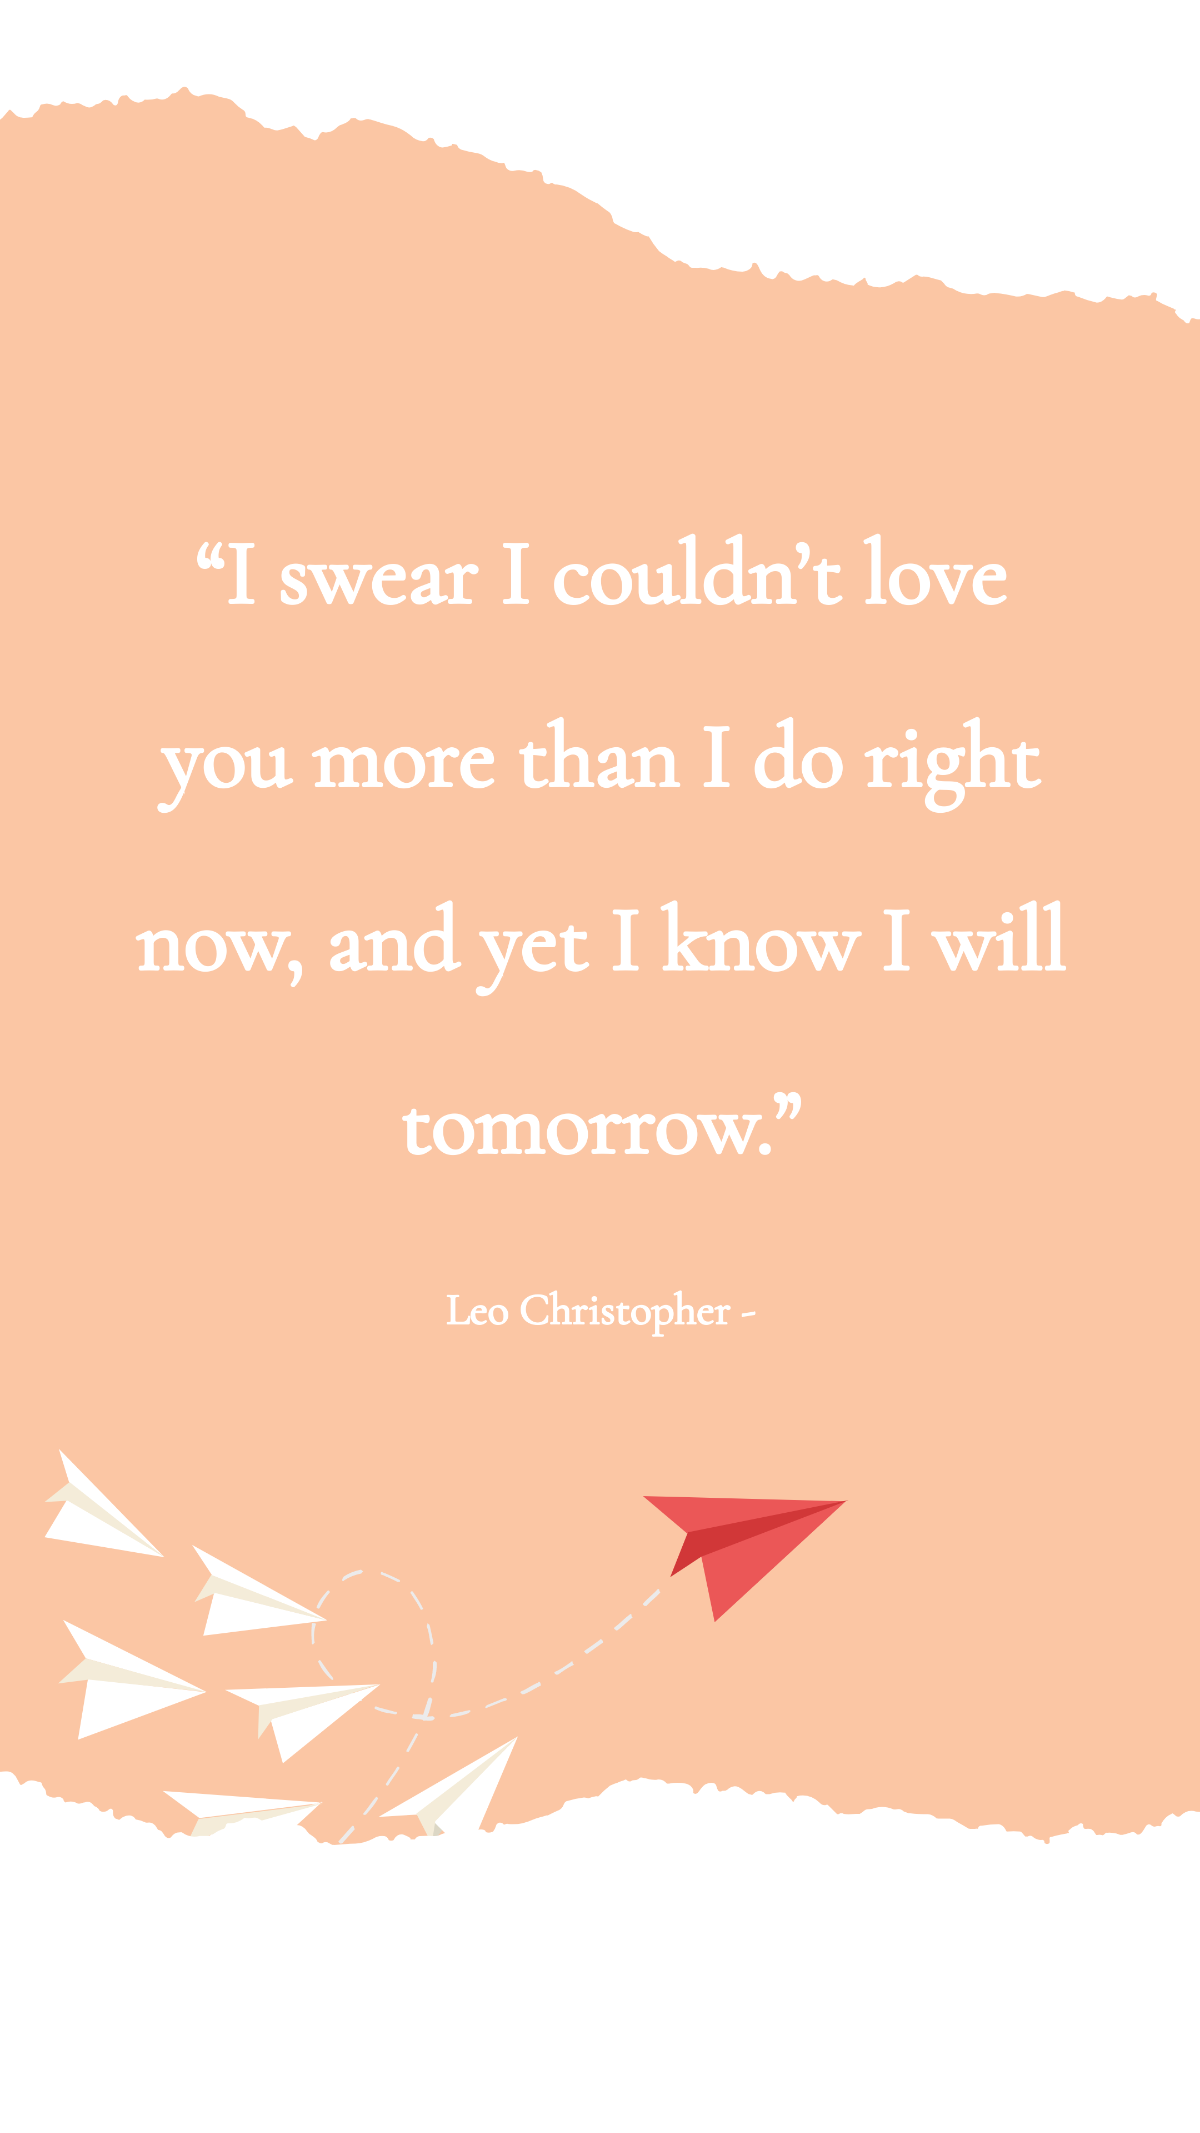 Leo Christopher - “I swear I couldn’t love you more than I do right now, and yet I know I will tomorrow.” Template